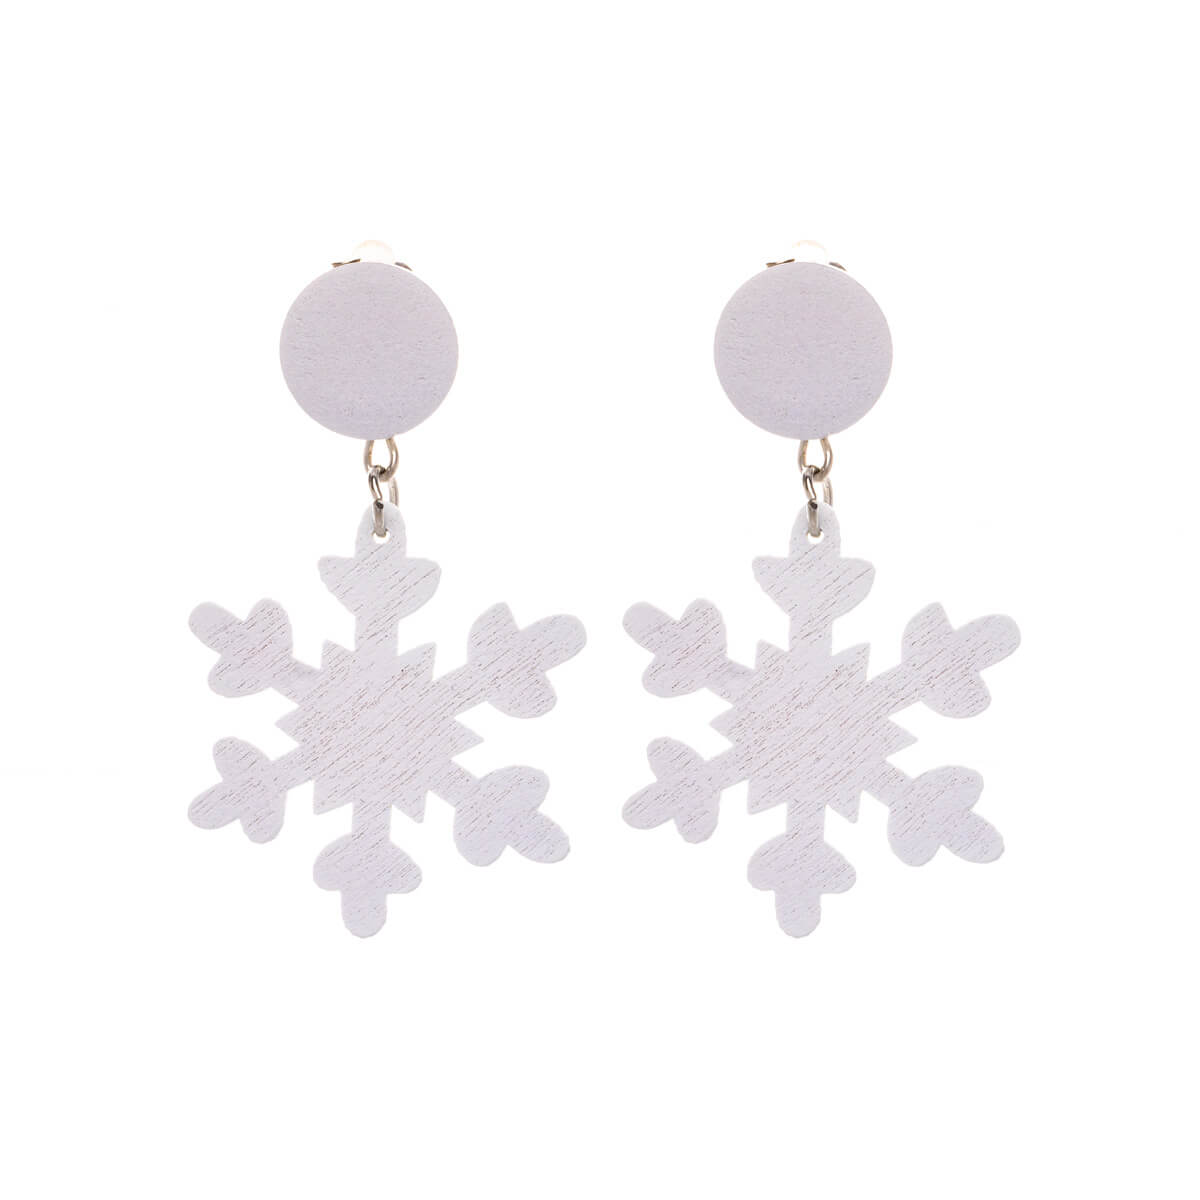 Wooden snowflake clip-on earrings - Made in Finland (Steel 316L)